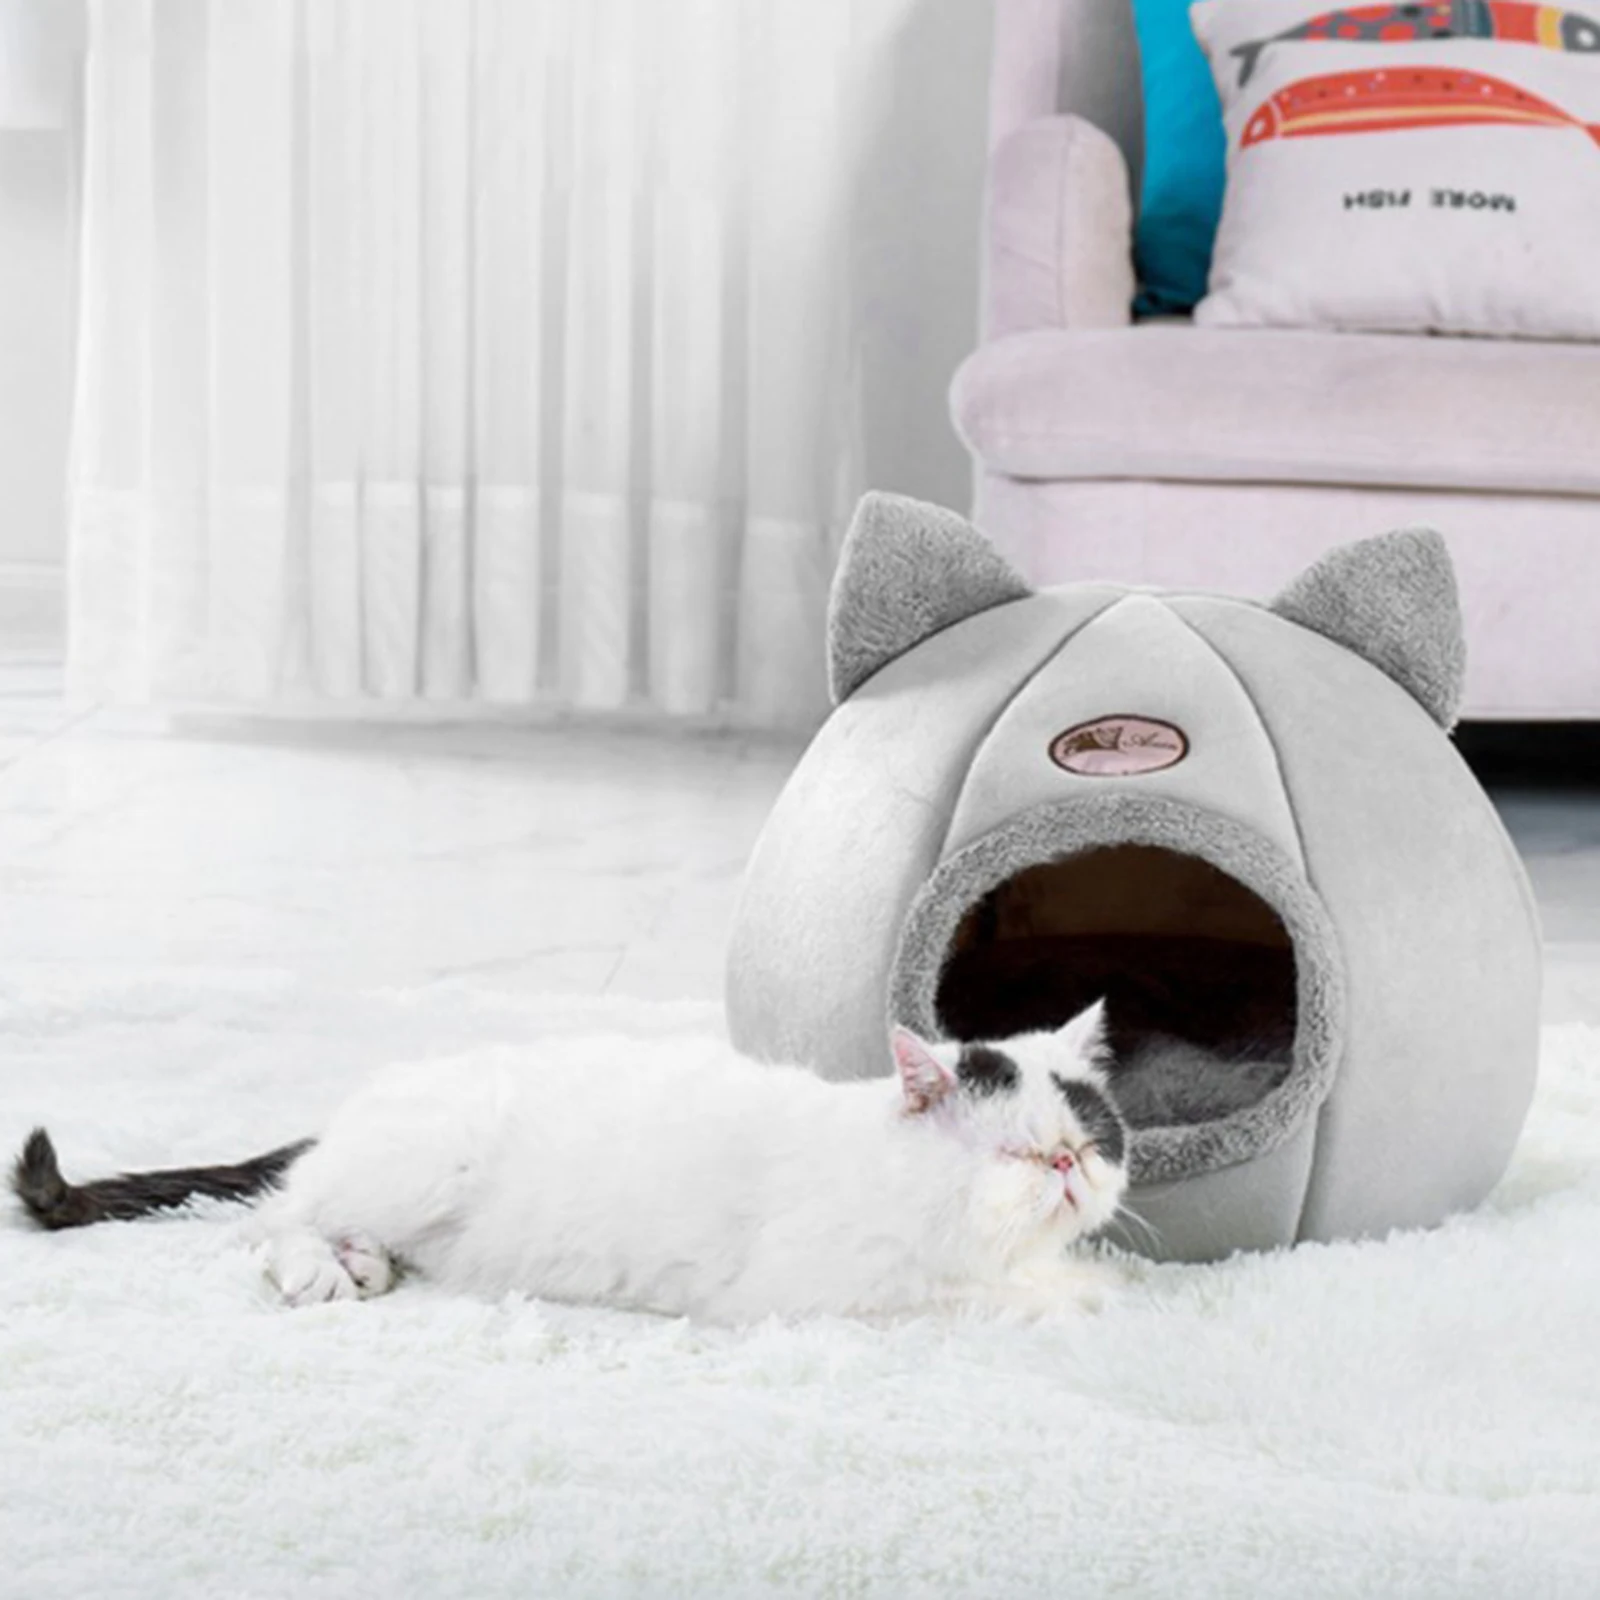 Winter Warm Cat Nest Bed Plush Soft Portable Cute Kittens House Cave Sleeping Bag Cushion Thickened Pet Bed